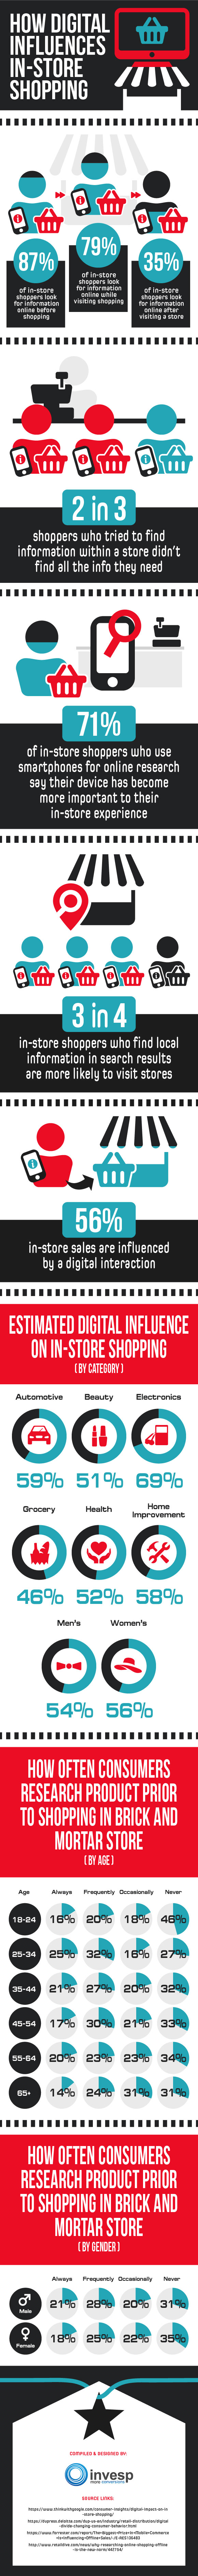 How digital influences in-store shopping